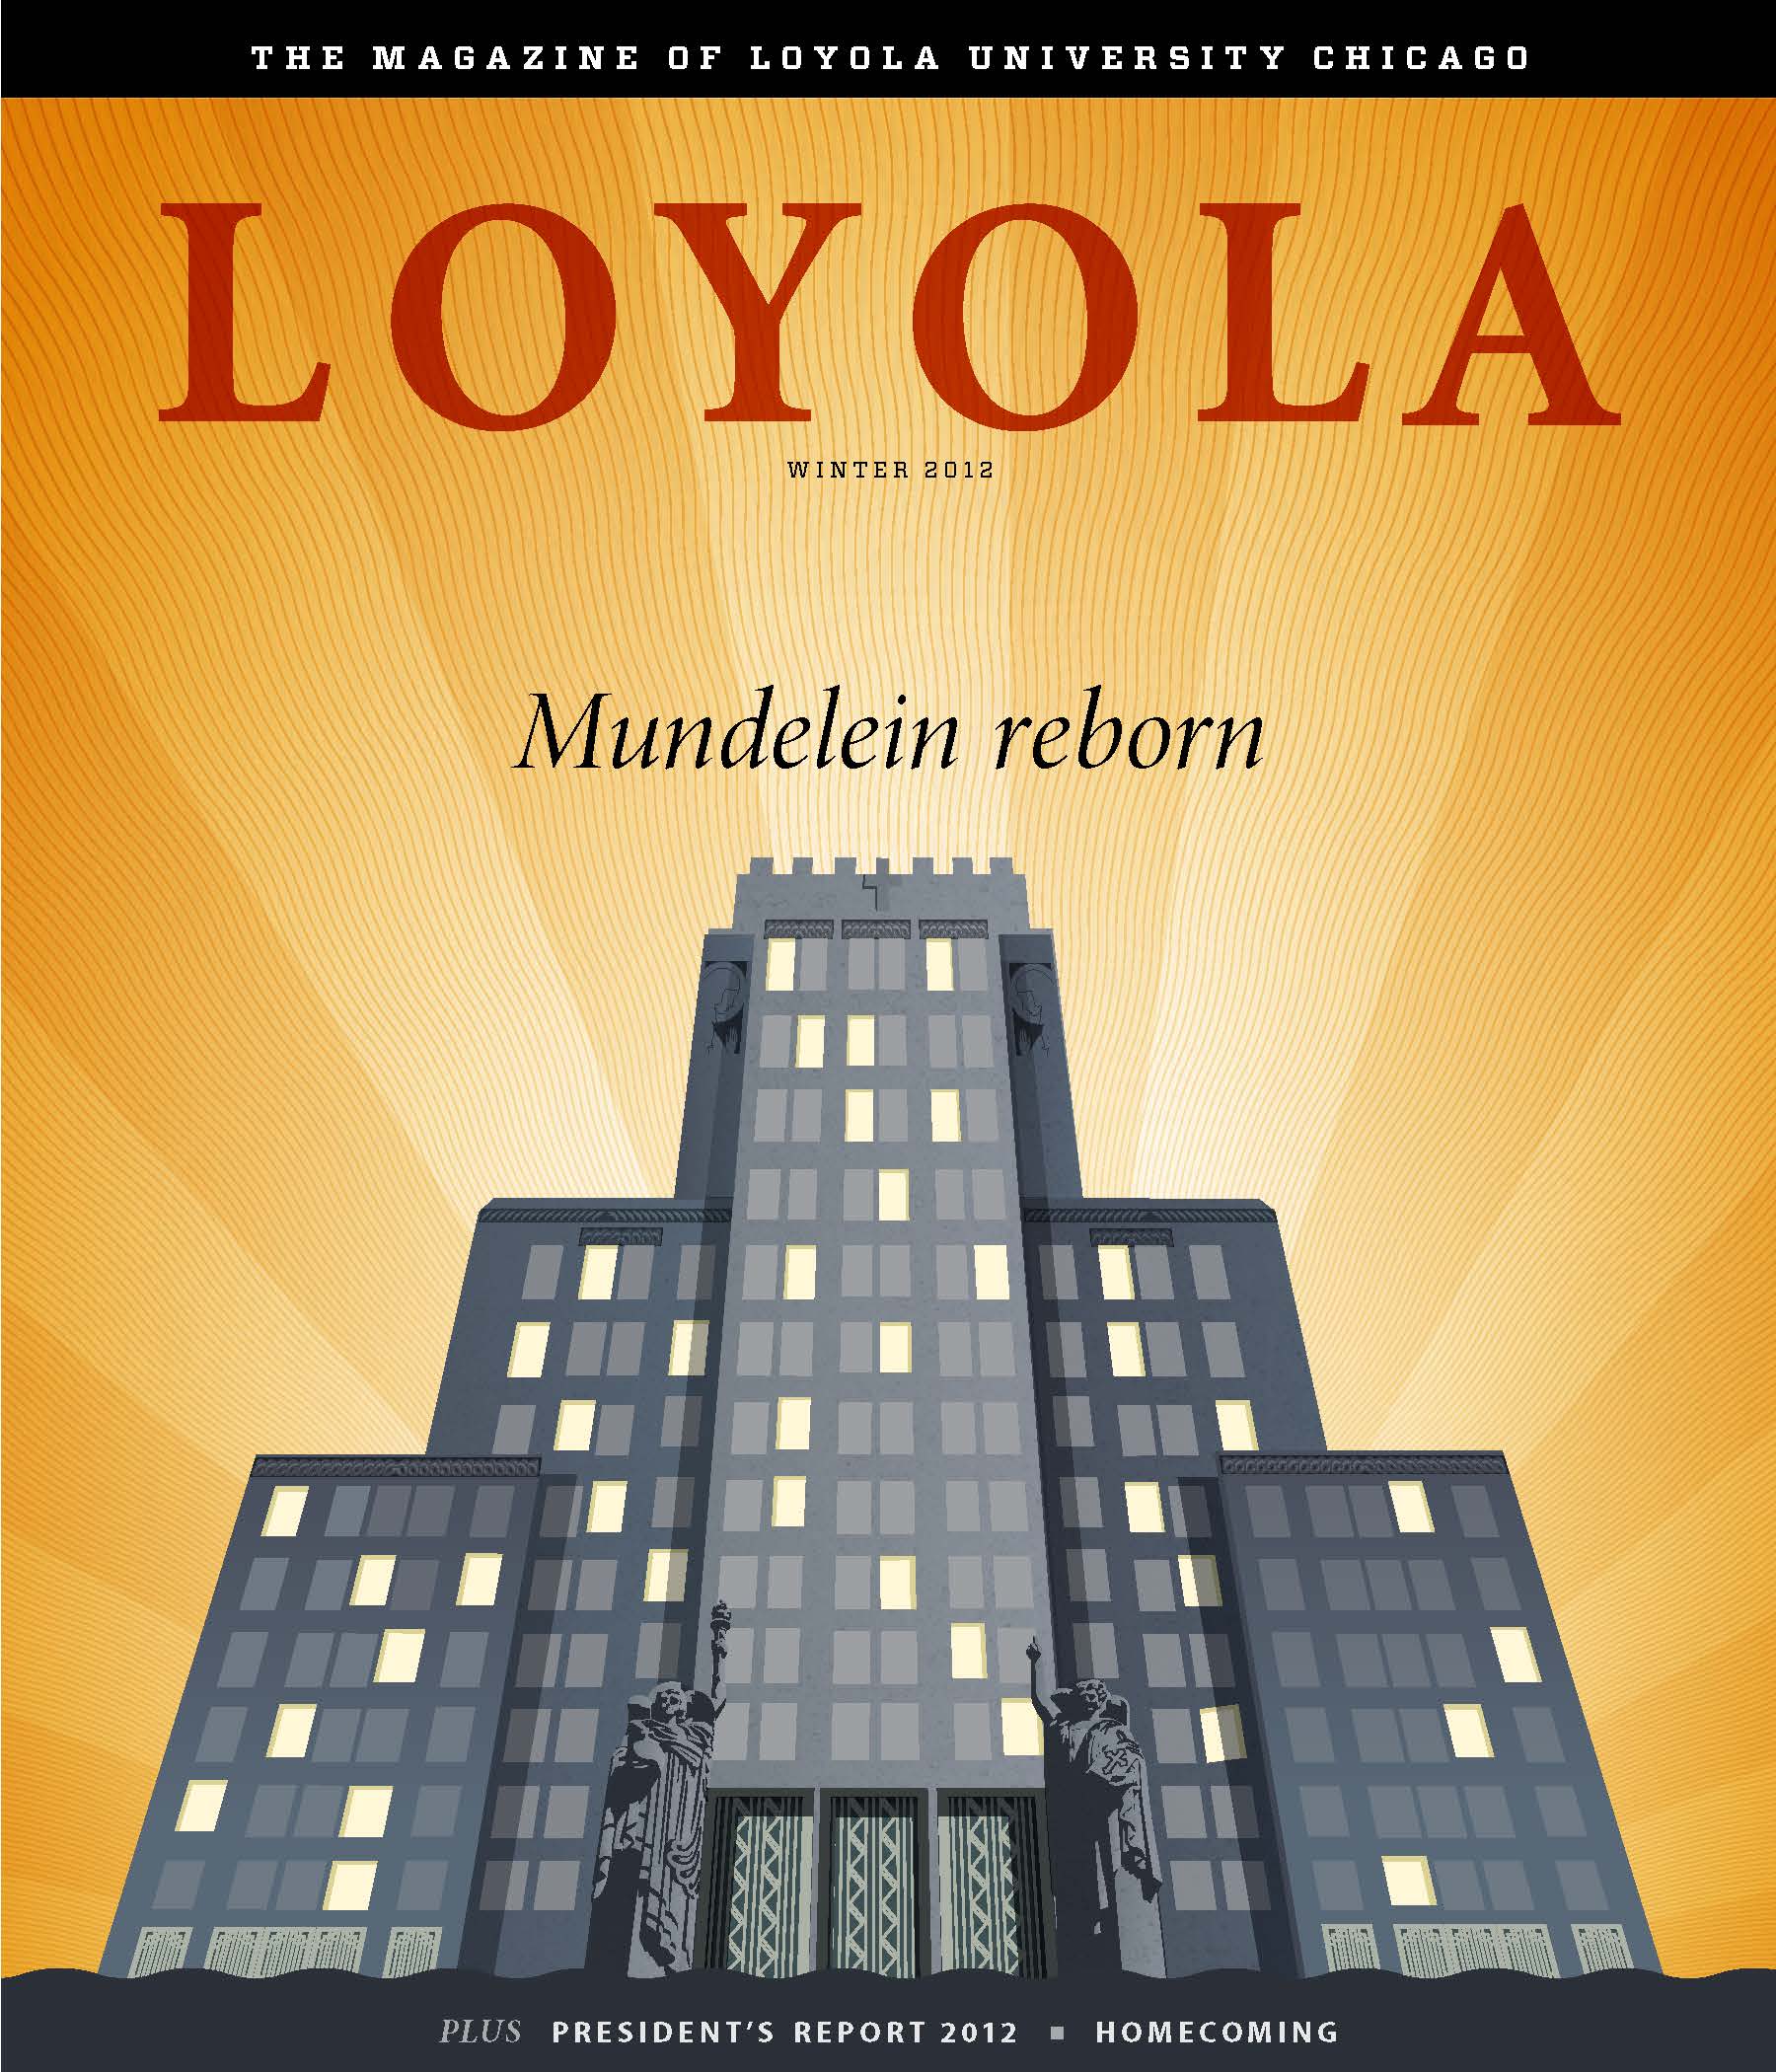 The winter 2012 Loyola magazine cover with an illustration of Mundelein hall over a yellow background with the headline 